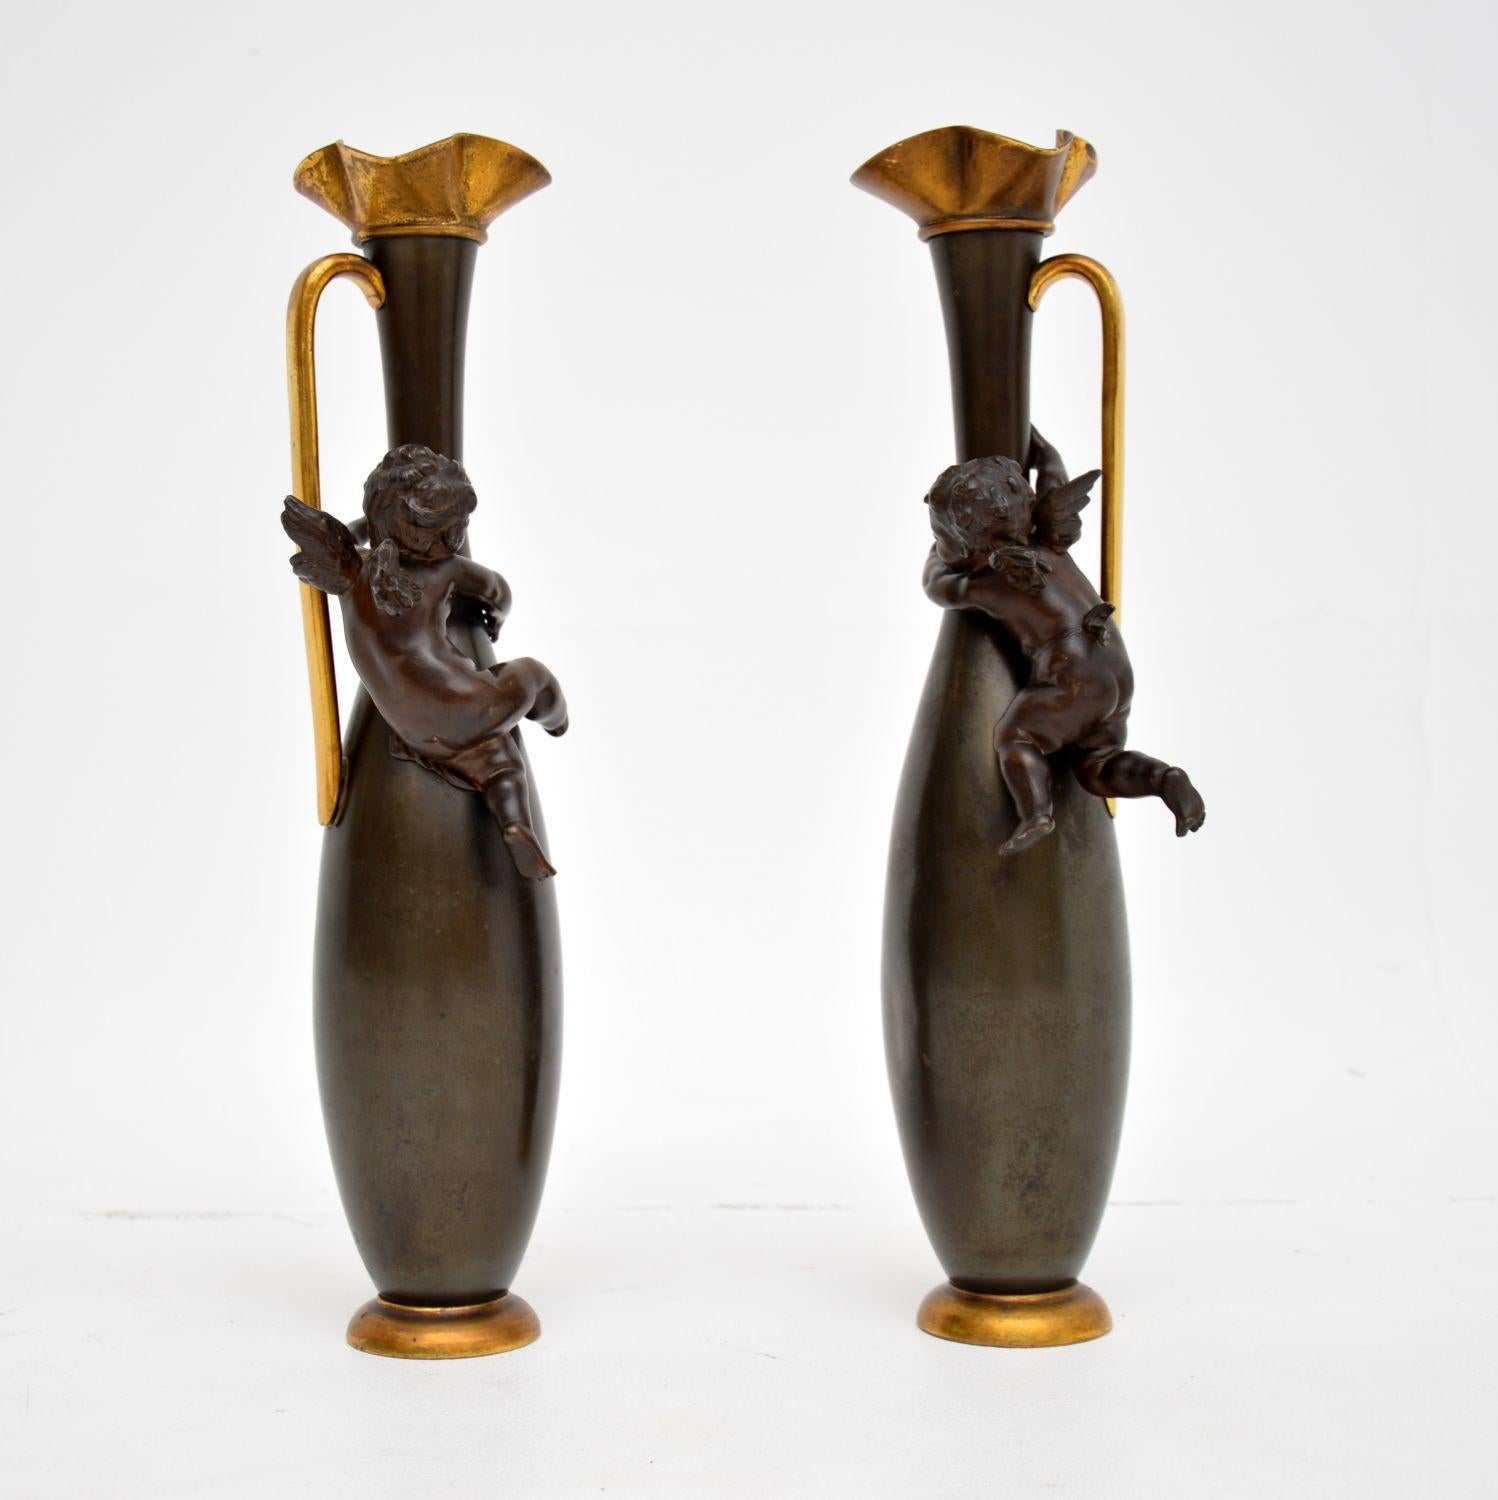 A gorgeous pair of antique French solid bronze pitchers. They were made in France, and date from around the 1890-1900 period.

They are of stunning quality, and are purely decorative as there is no opening at the top to store anything inside. They